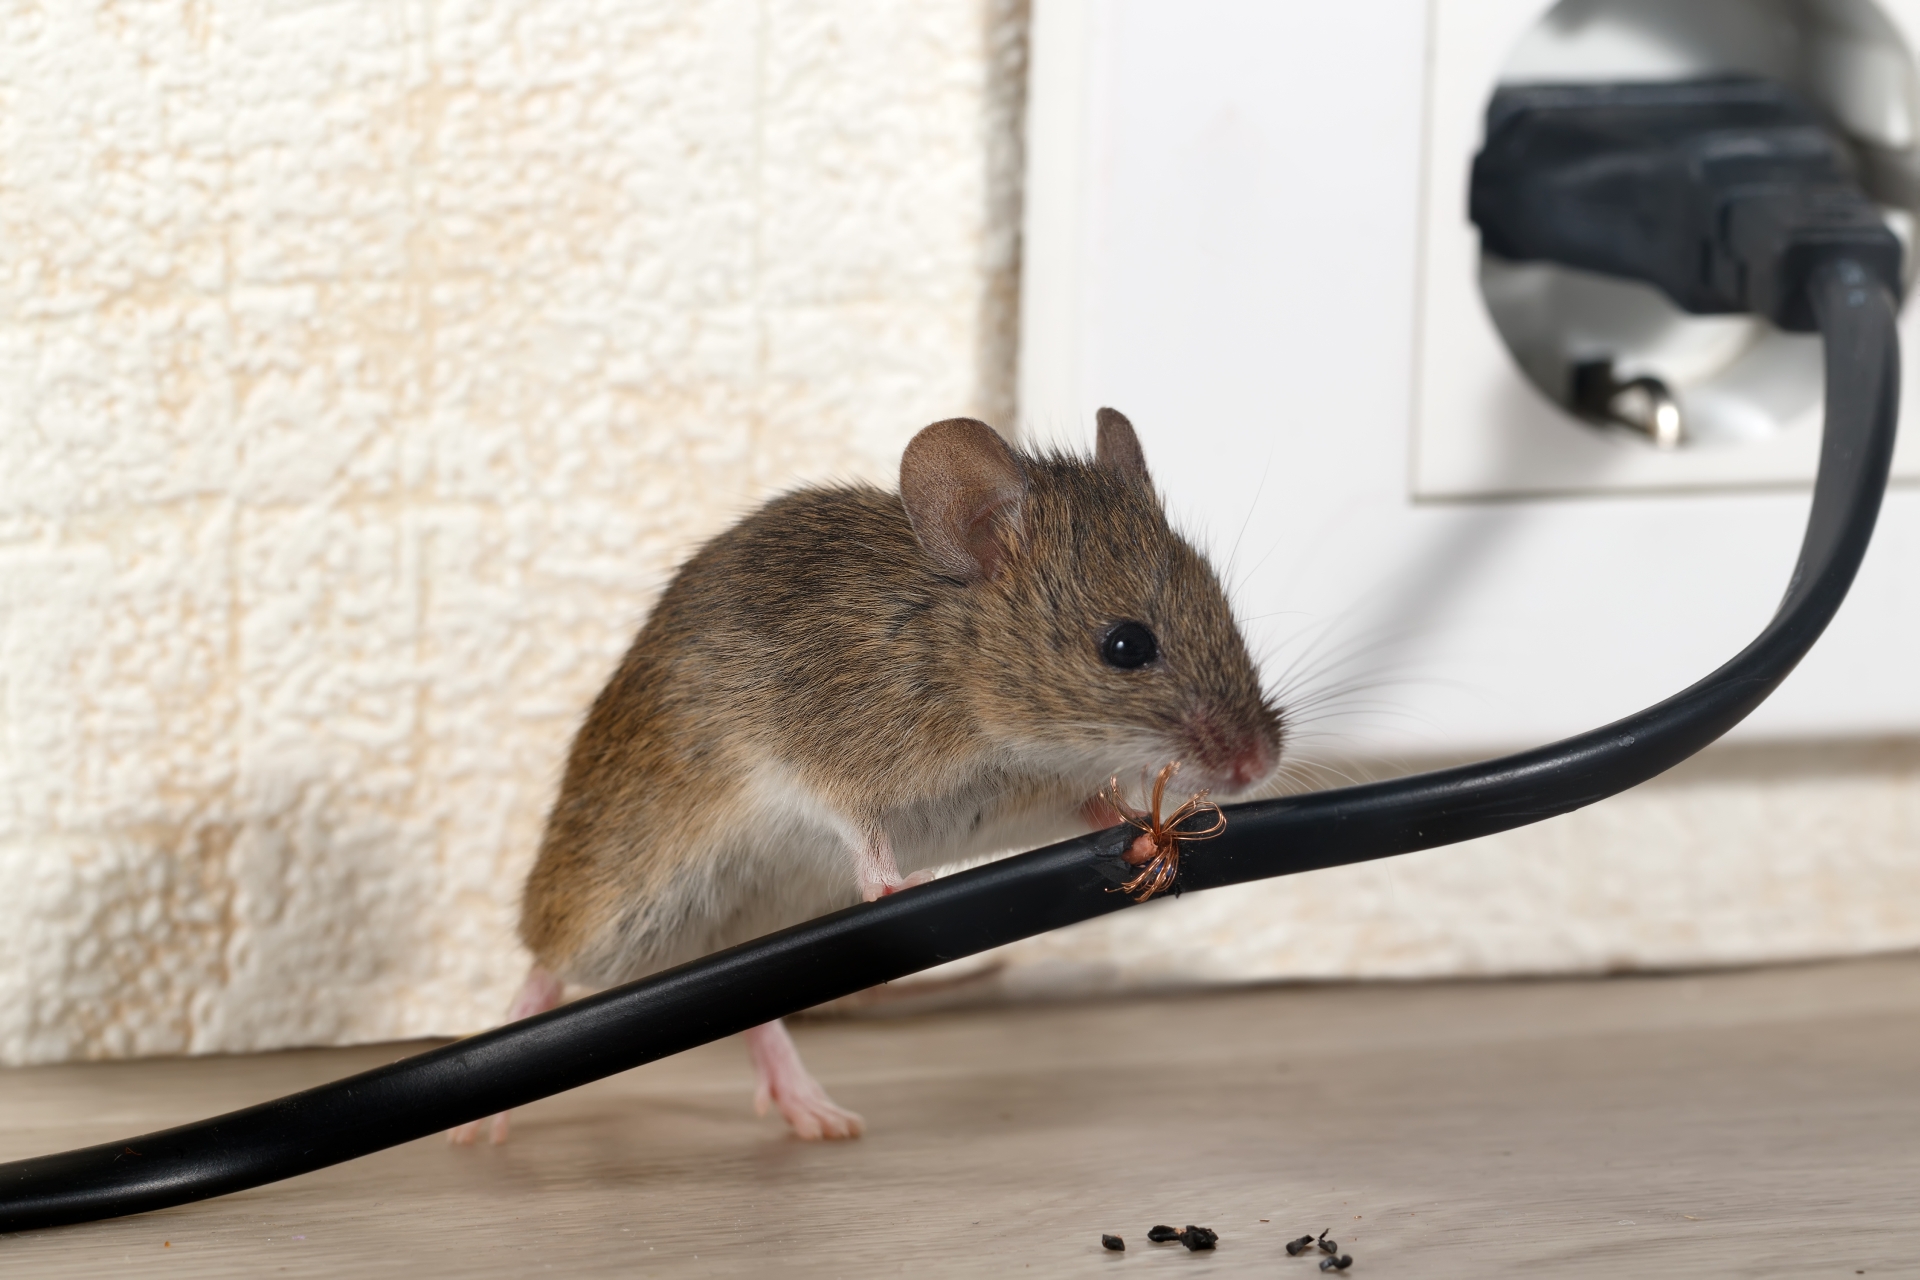 Mice Infestation, Pest Control in Yeading, UB4. Call Now 020 8166 9746